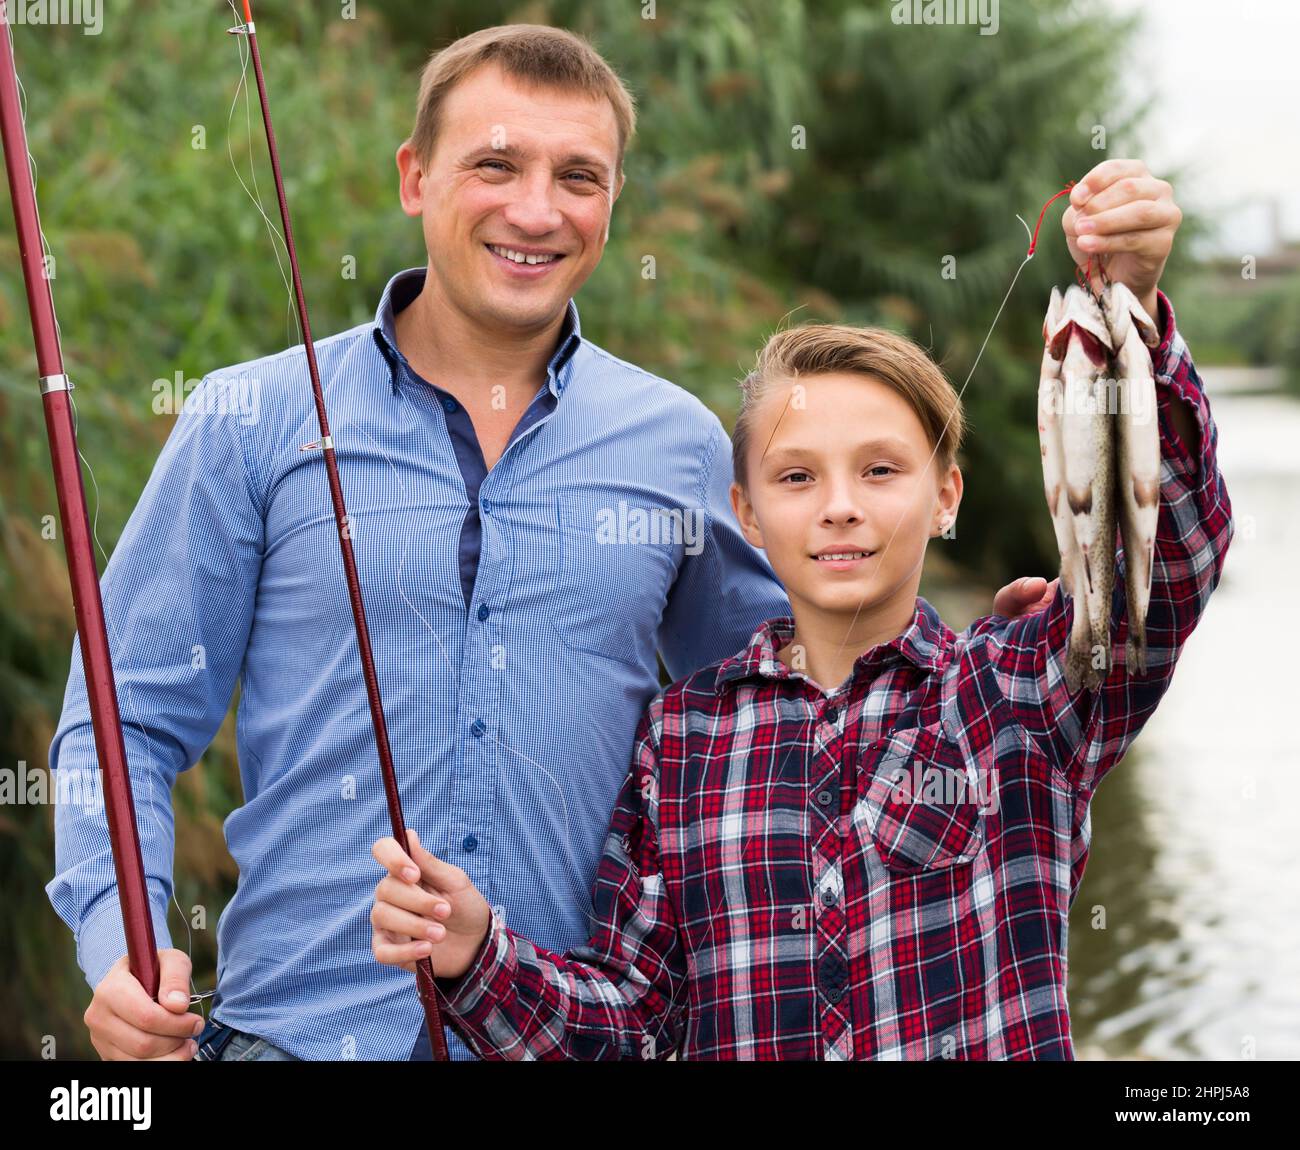 Adult father with son looking at fish on hook Stock Photo